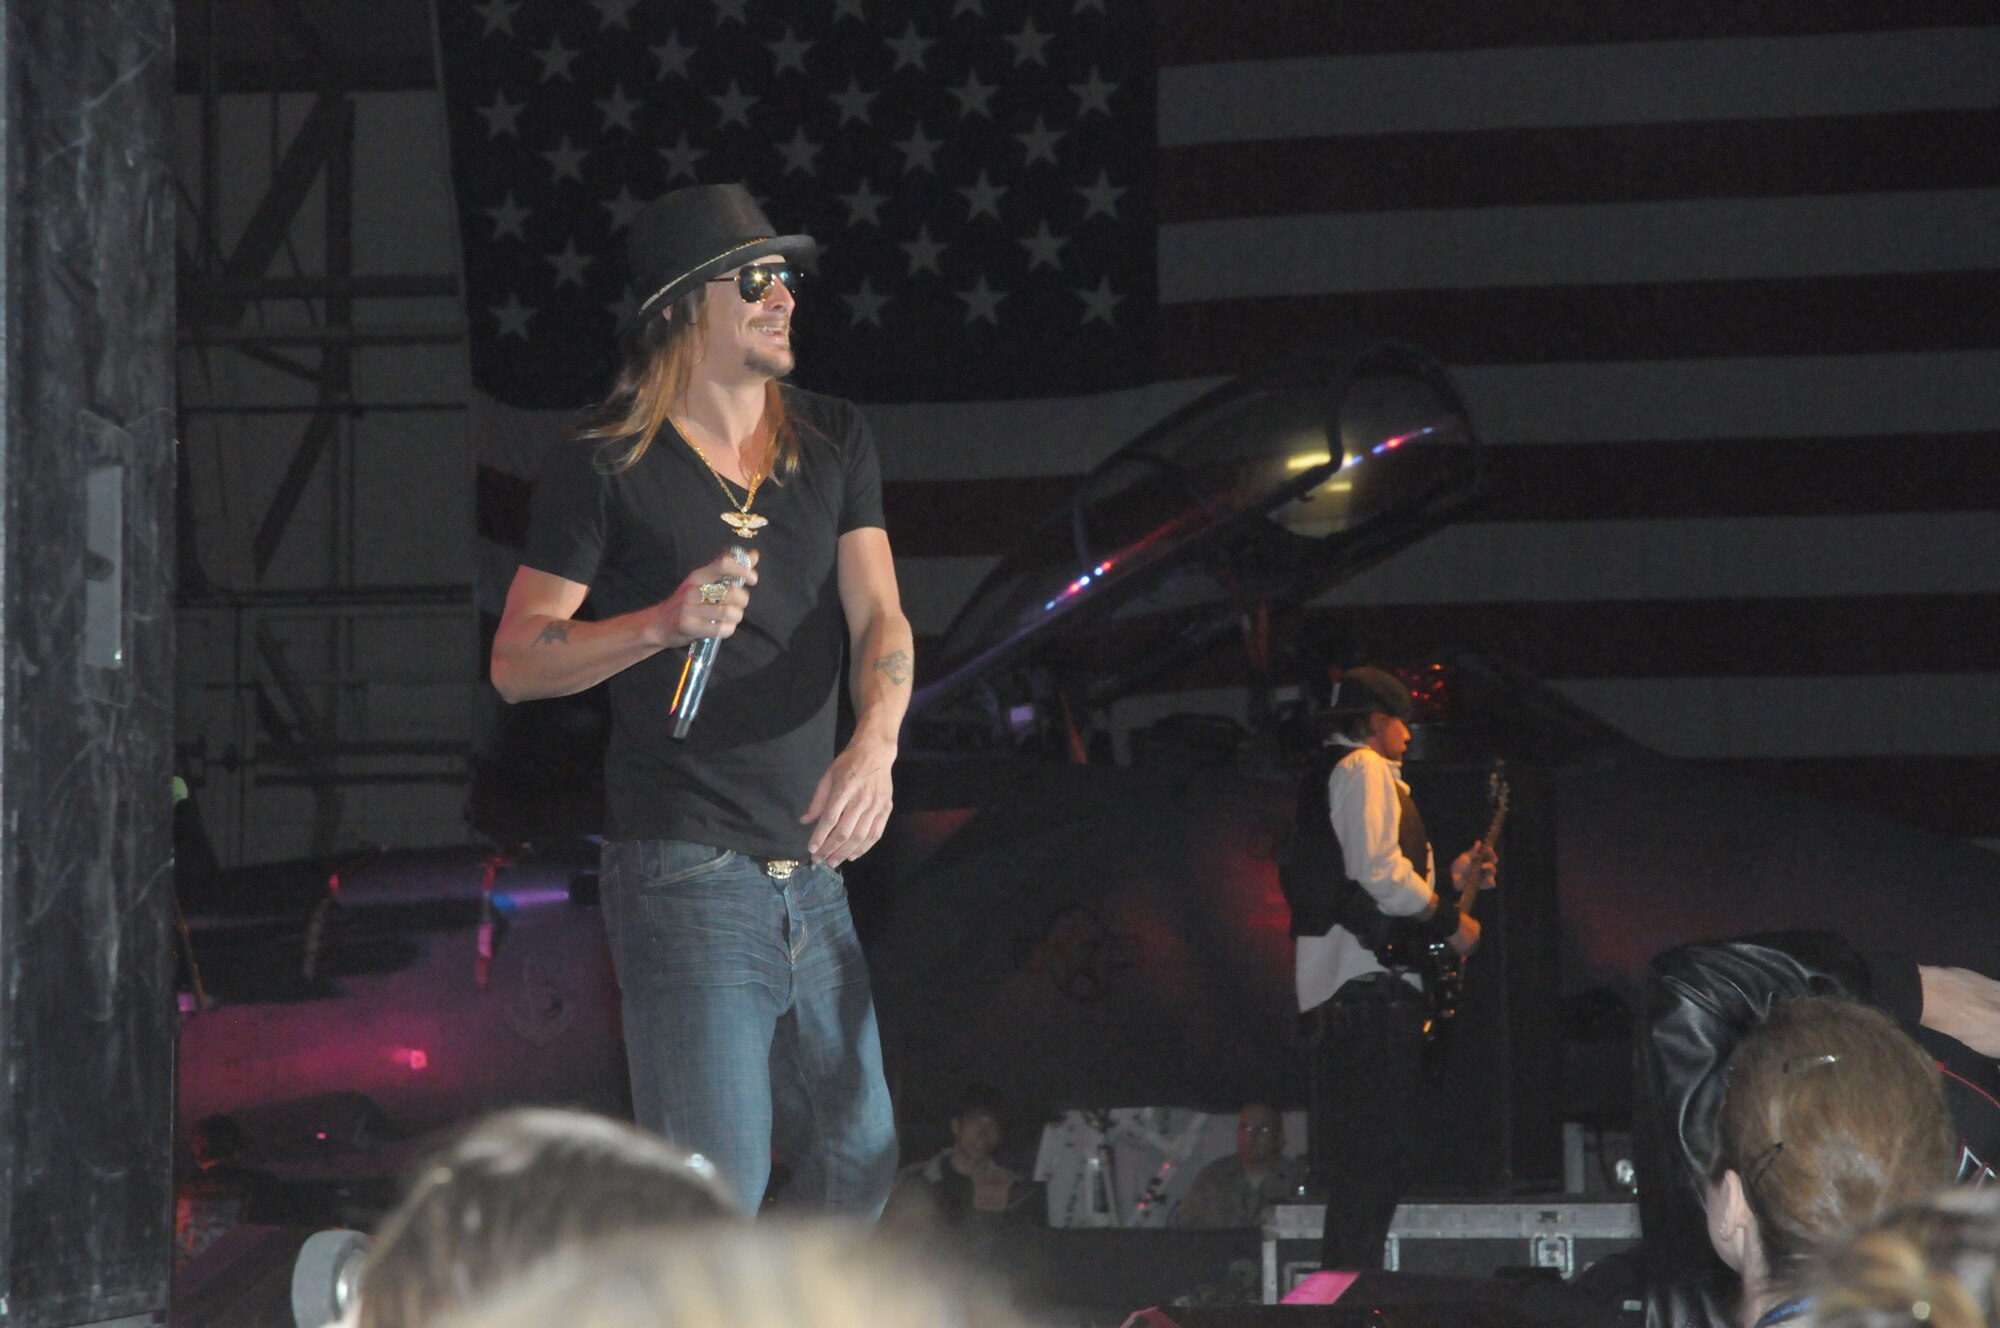 Kid Rock and the Twisted Brown Trucker Band performed live during the Tour for the Troops 2009 concert in Hangar 7 at RAF Lakenheath, England, Dec. 11.  Kid Rock was joined by comedian Carlos Mencia and singer Jessie James as they toured bases in Europe and Southwest Asia to show their appreciation and support for the military.  (U.S. Air Force photo by Staff Sgt. Connor Estes)